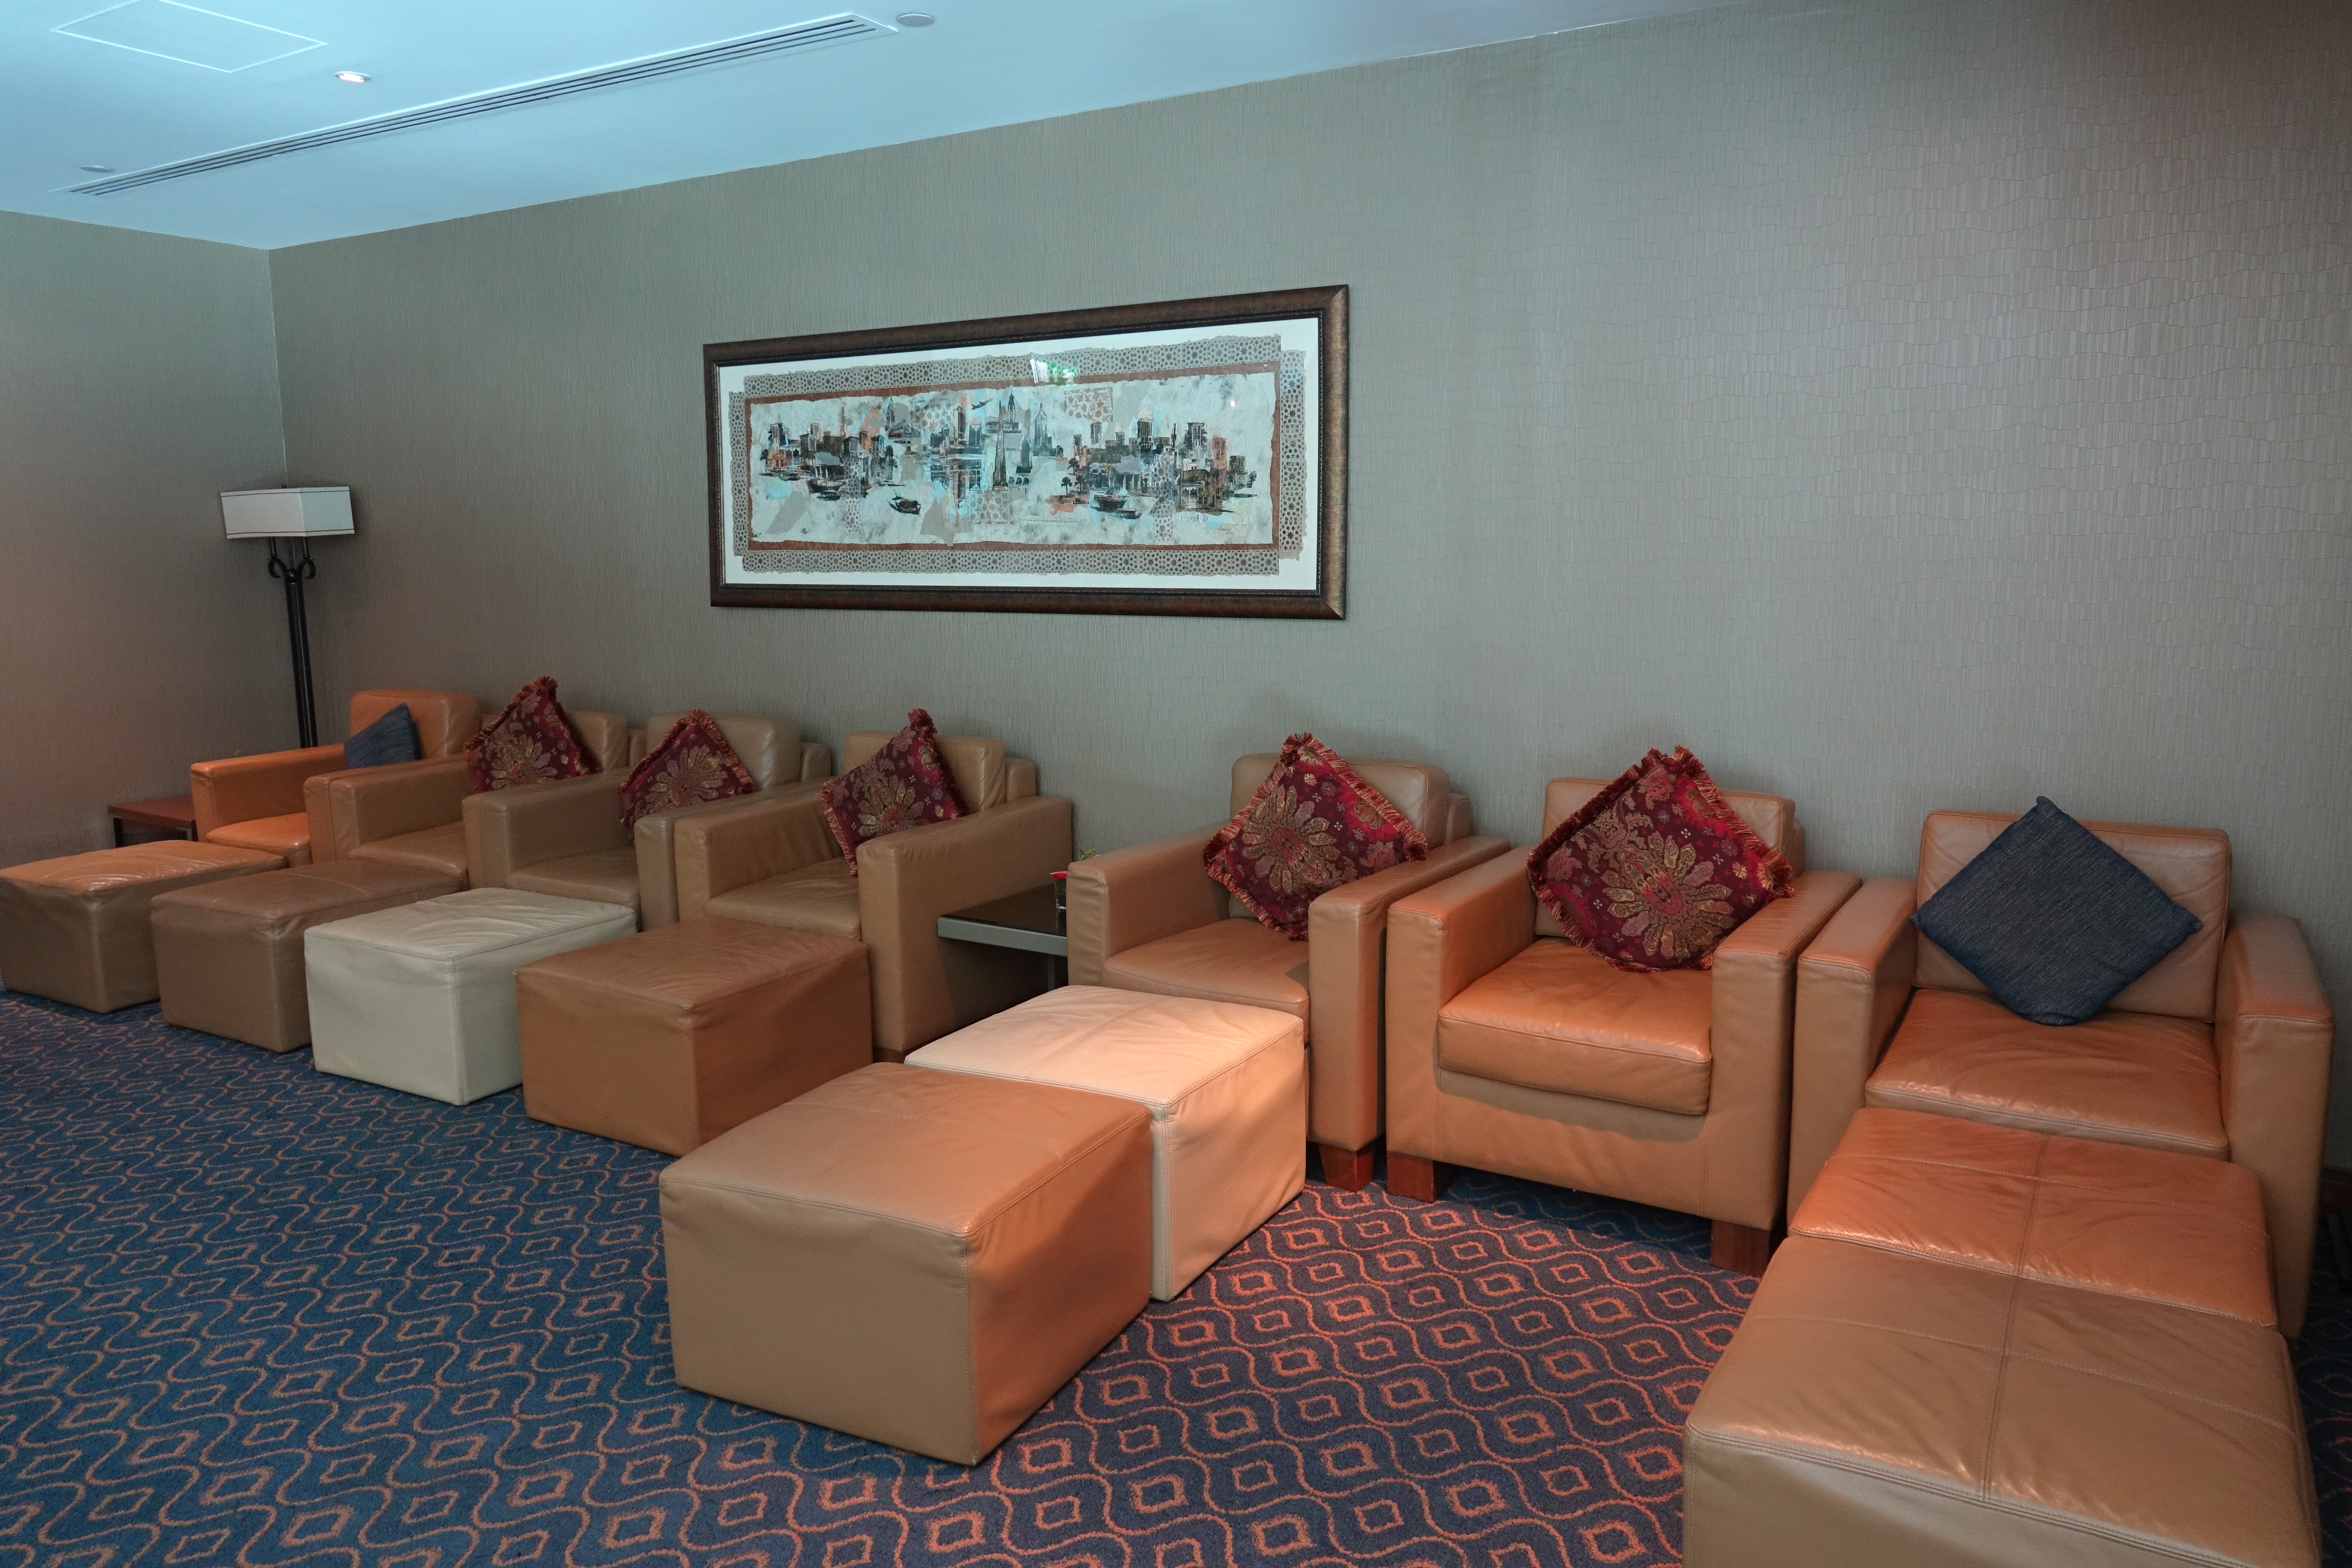 a group of leather chairs in a room